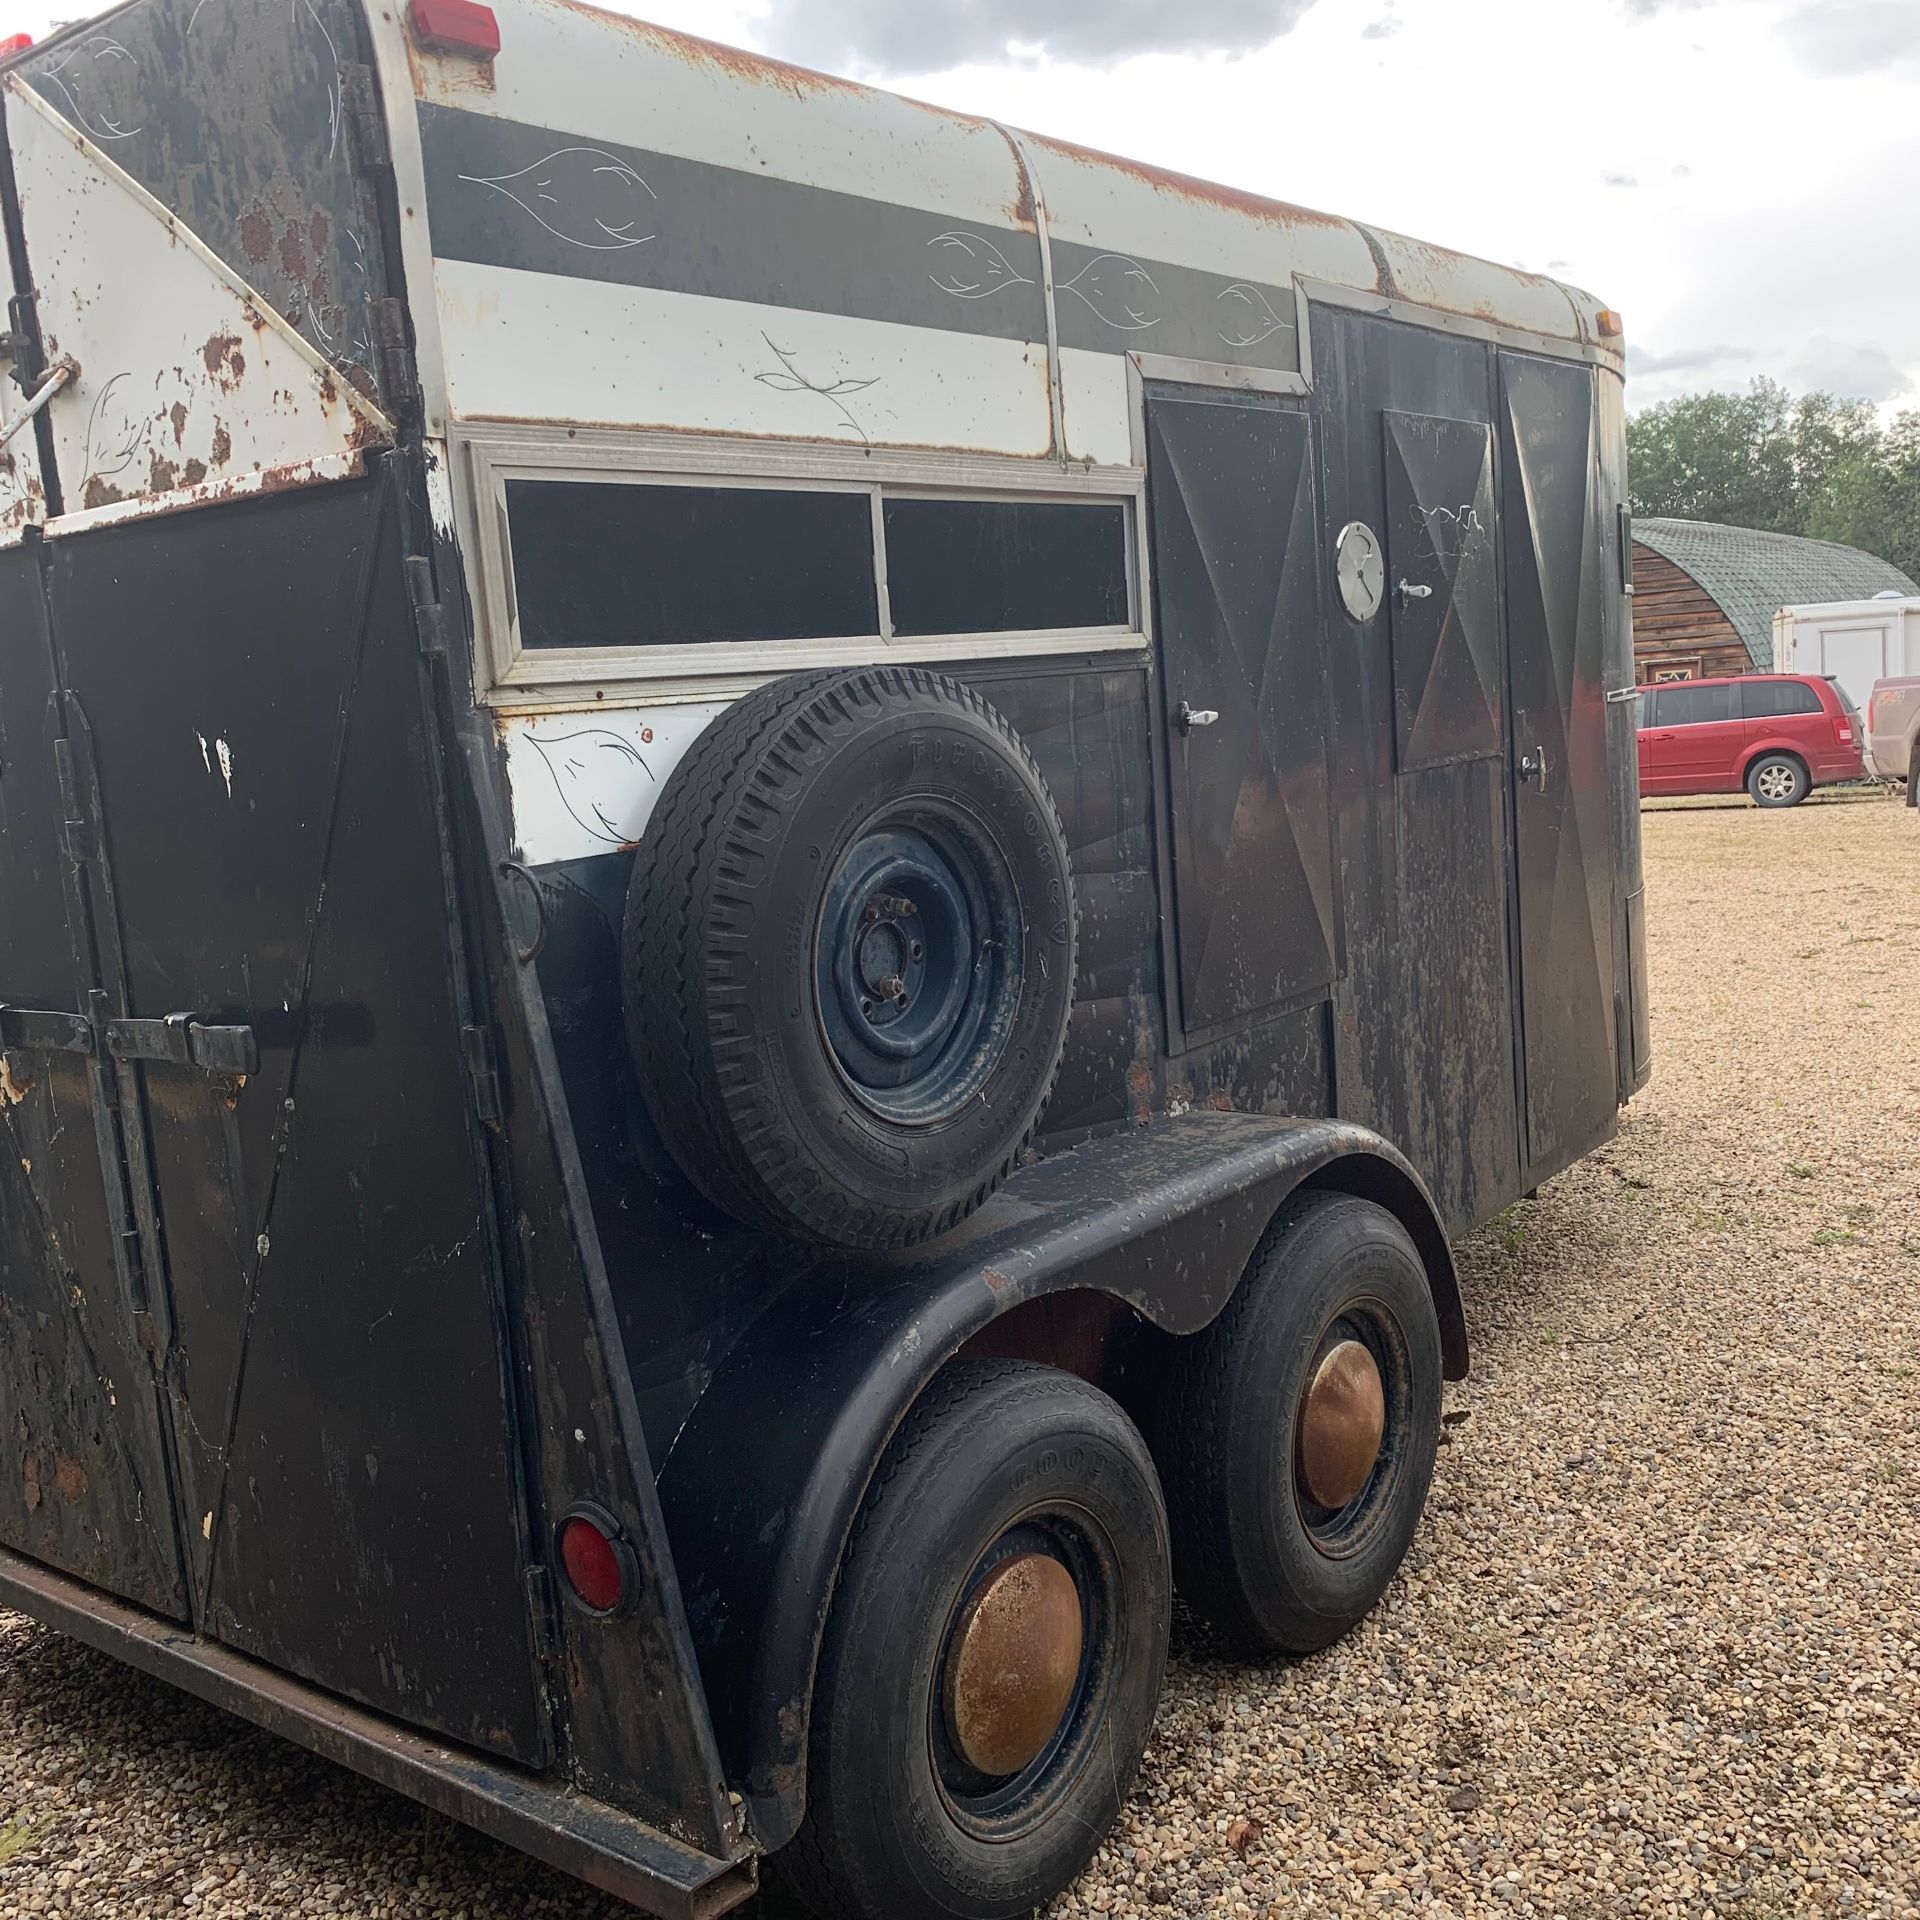 2 Stall Horse Trailer - Image 8 of 8